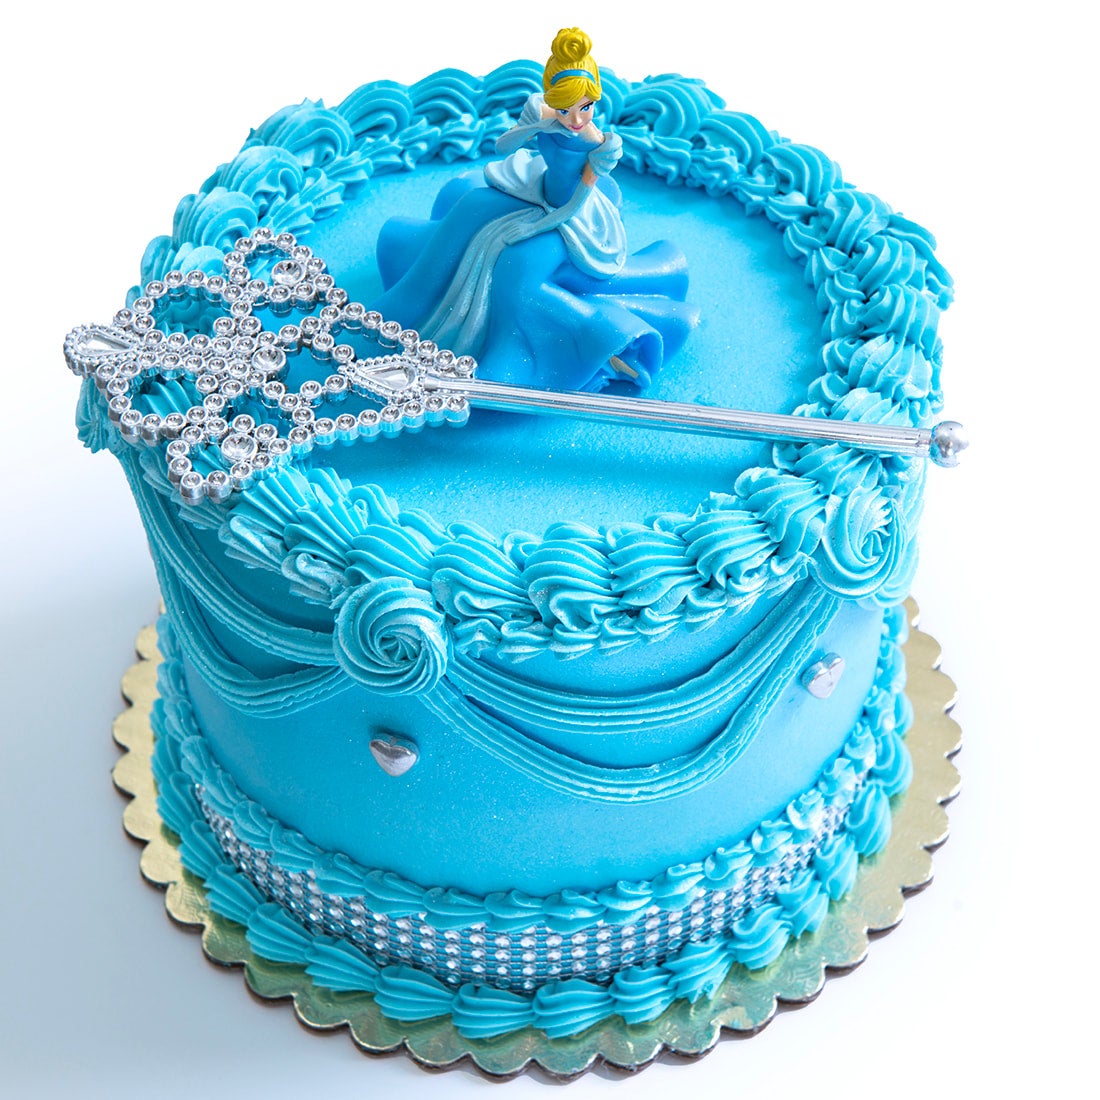 PRINCESS CINDERELLA THEMED CAKE in Ifako-Ijaiye - Meals & Drinks, Flossy  Cakes | Find more Meals & Drinks services online from olist.ng